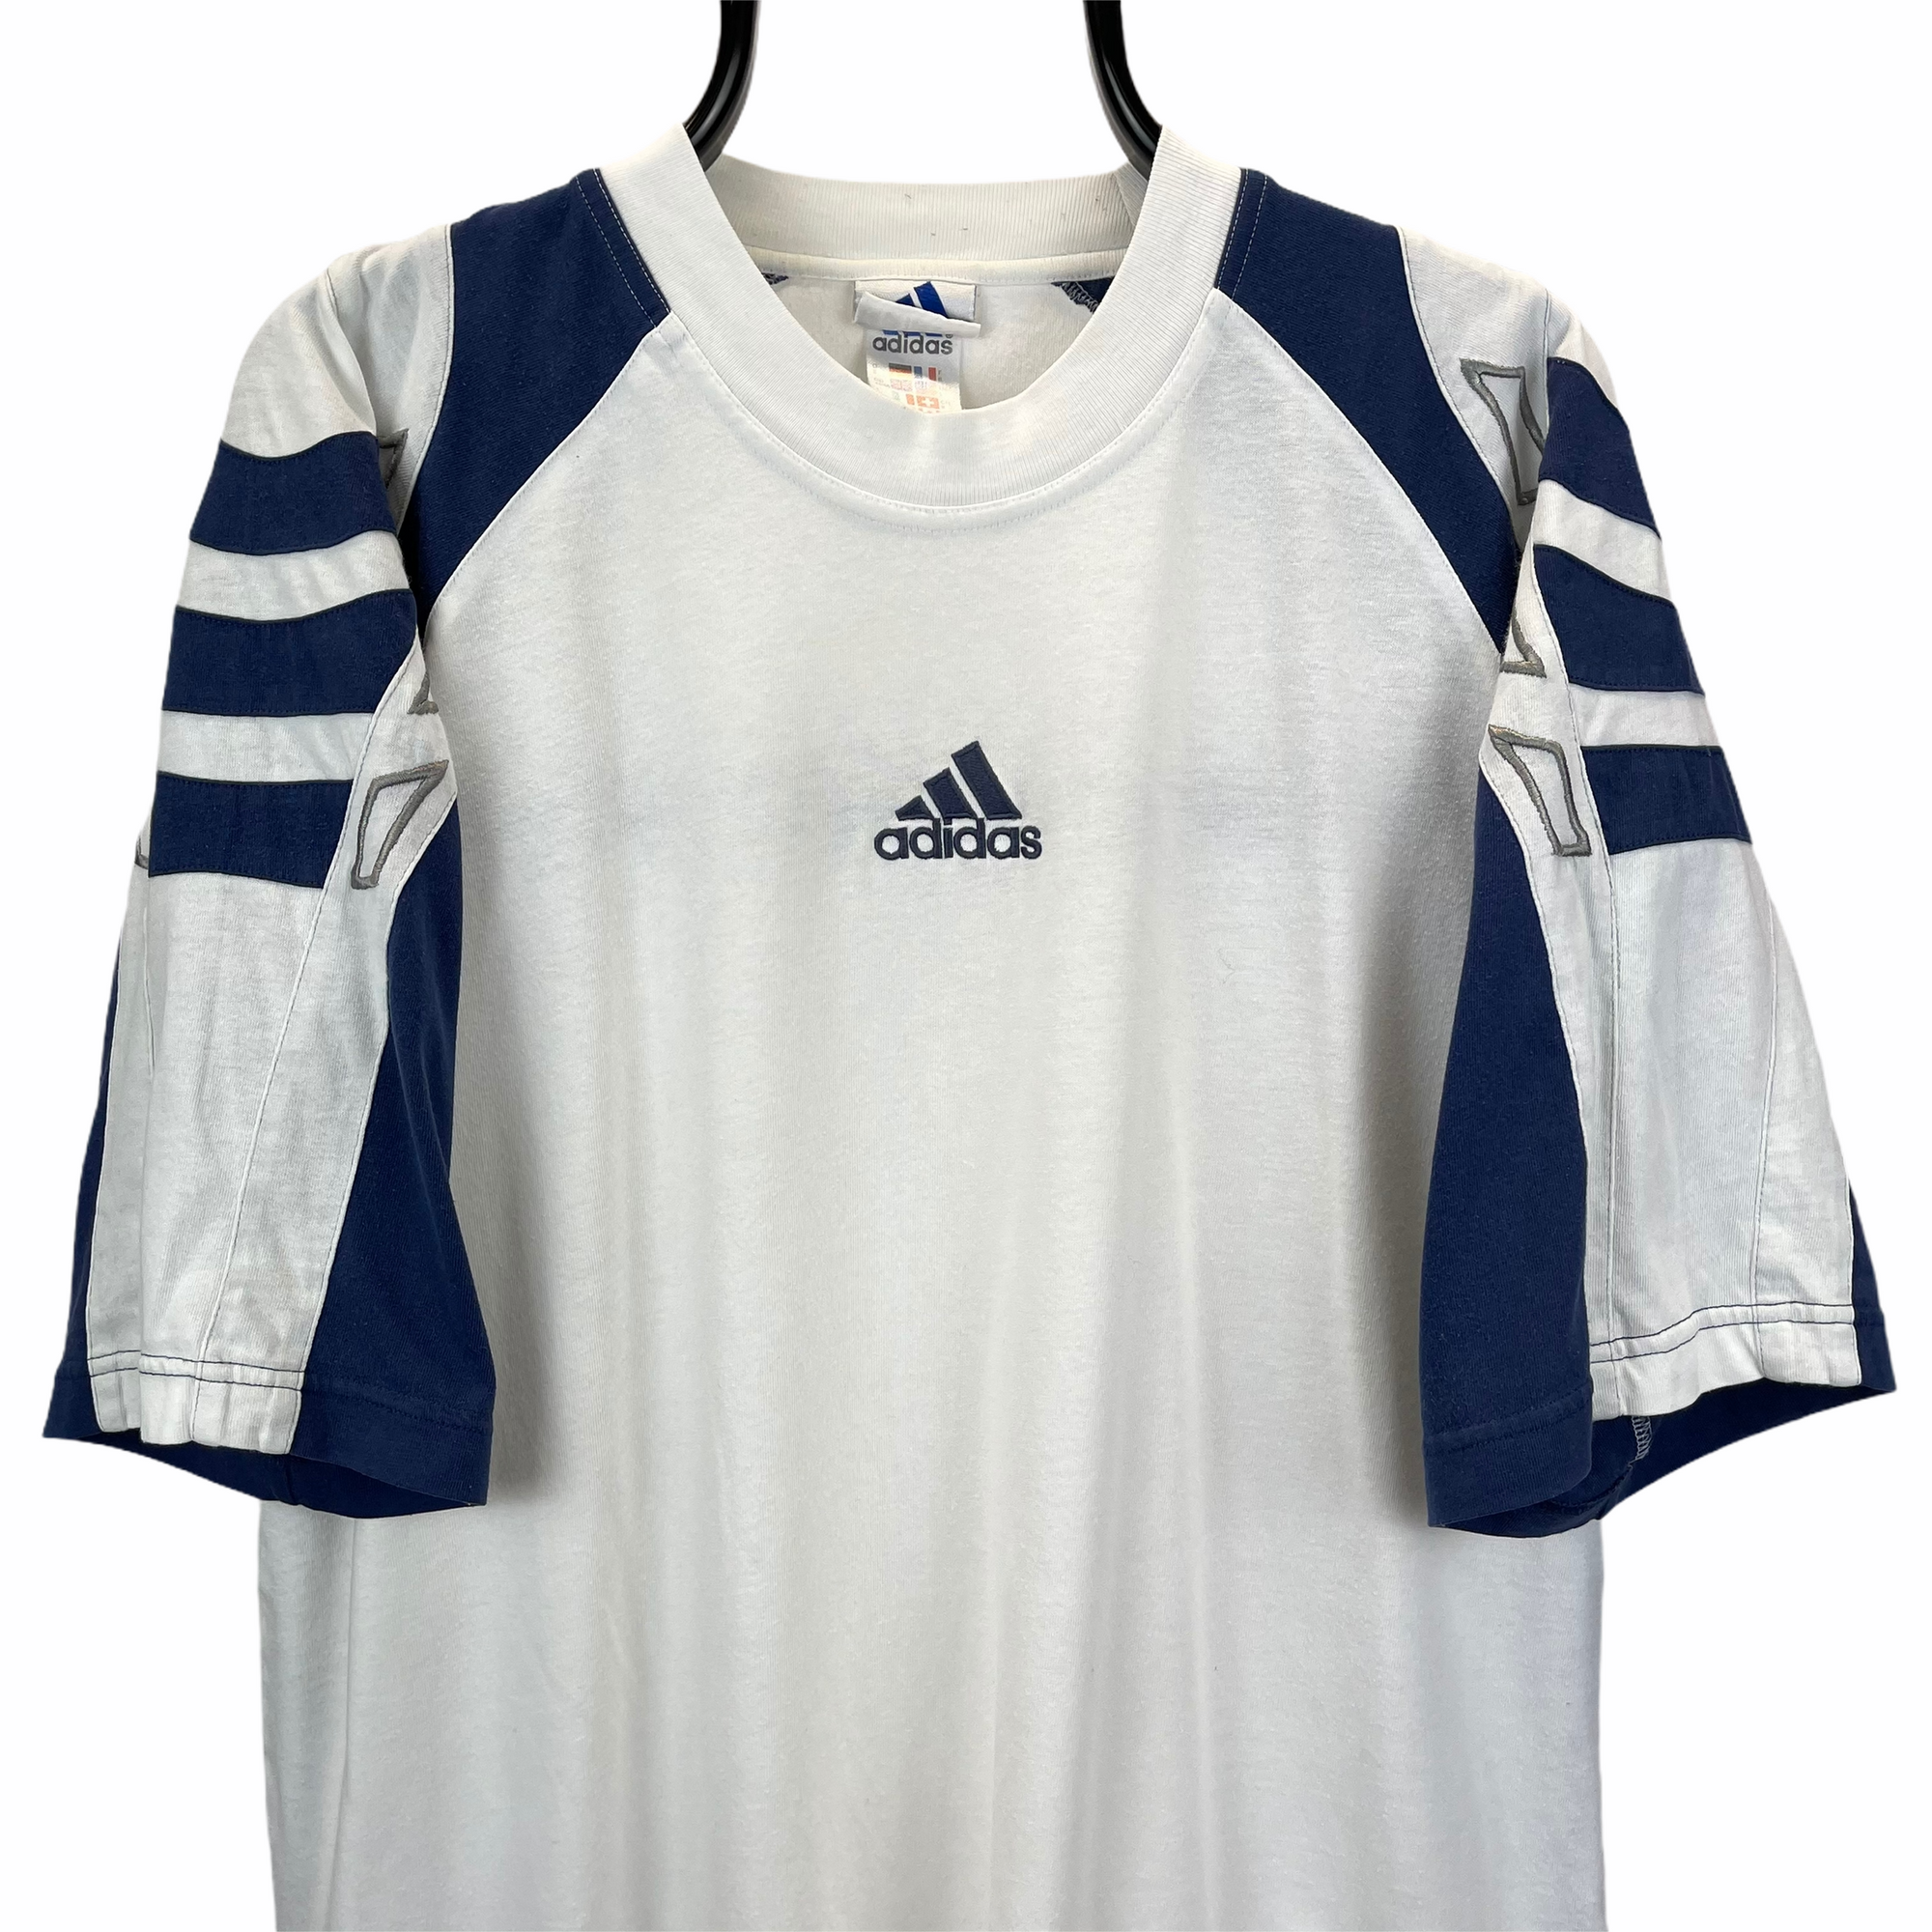 Vintage 90s Adidas Embroidered Centre Logo Tee in White & Navy - Men's Large/Women's XL